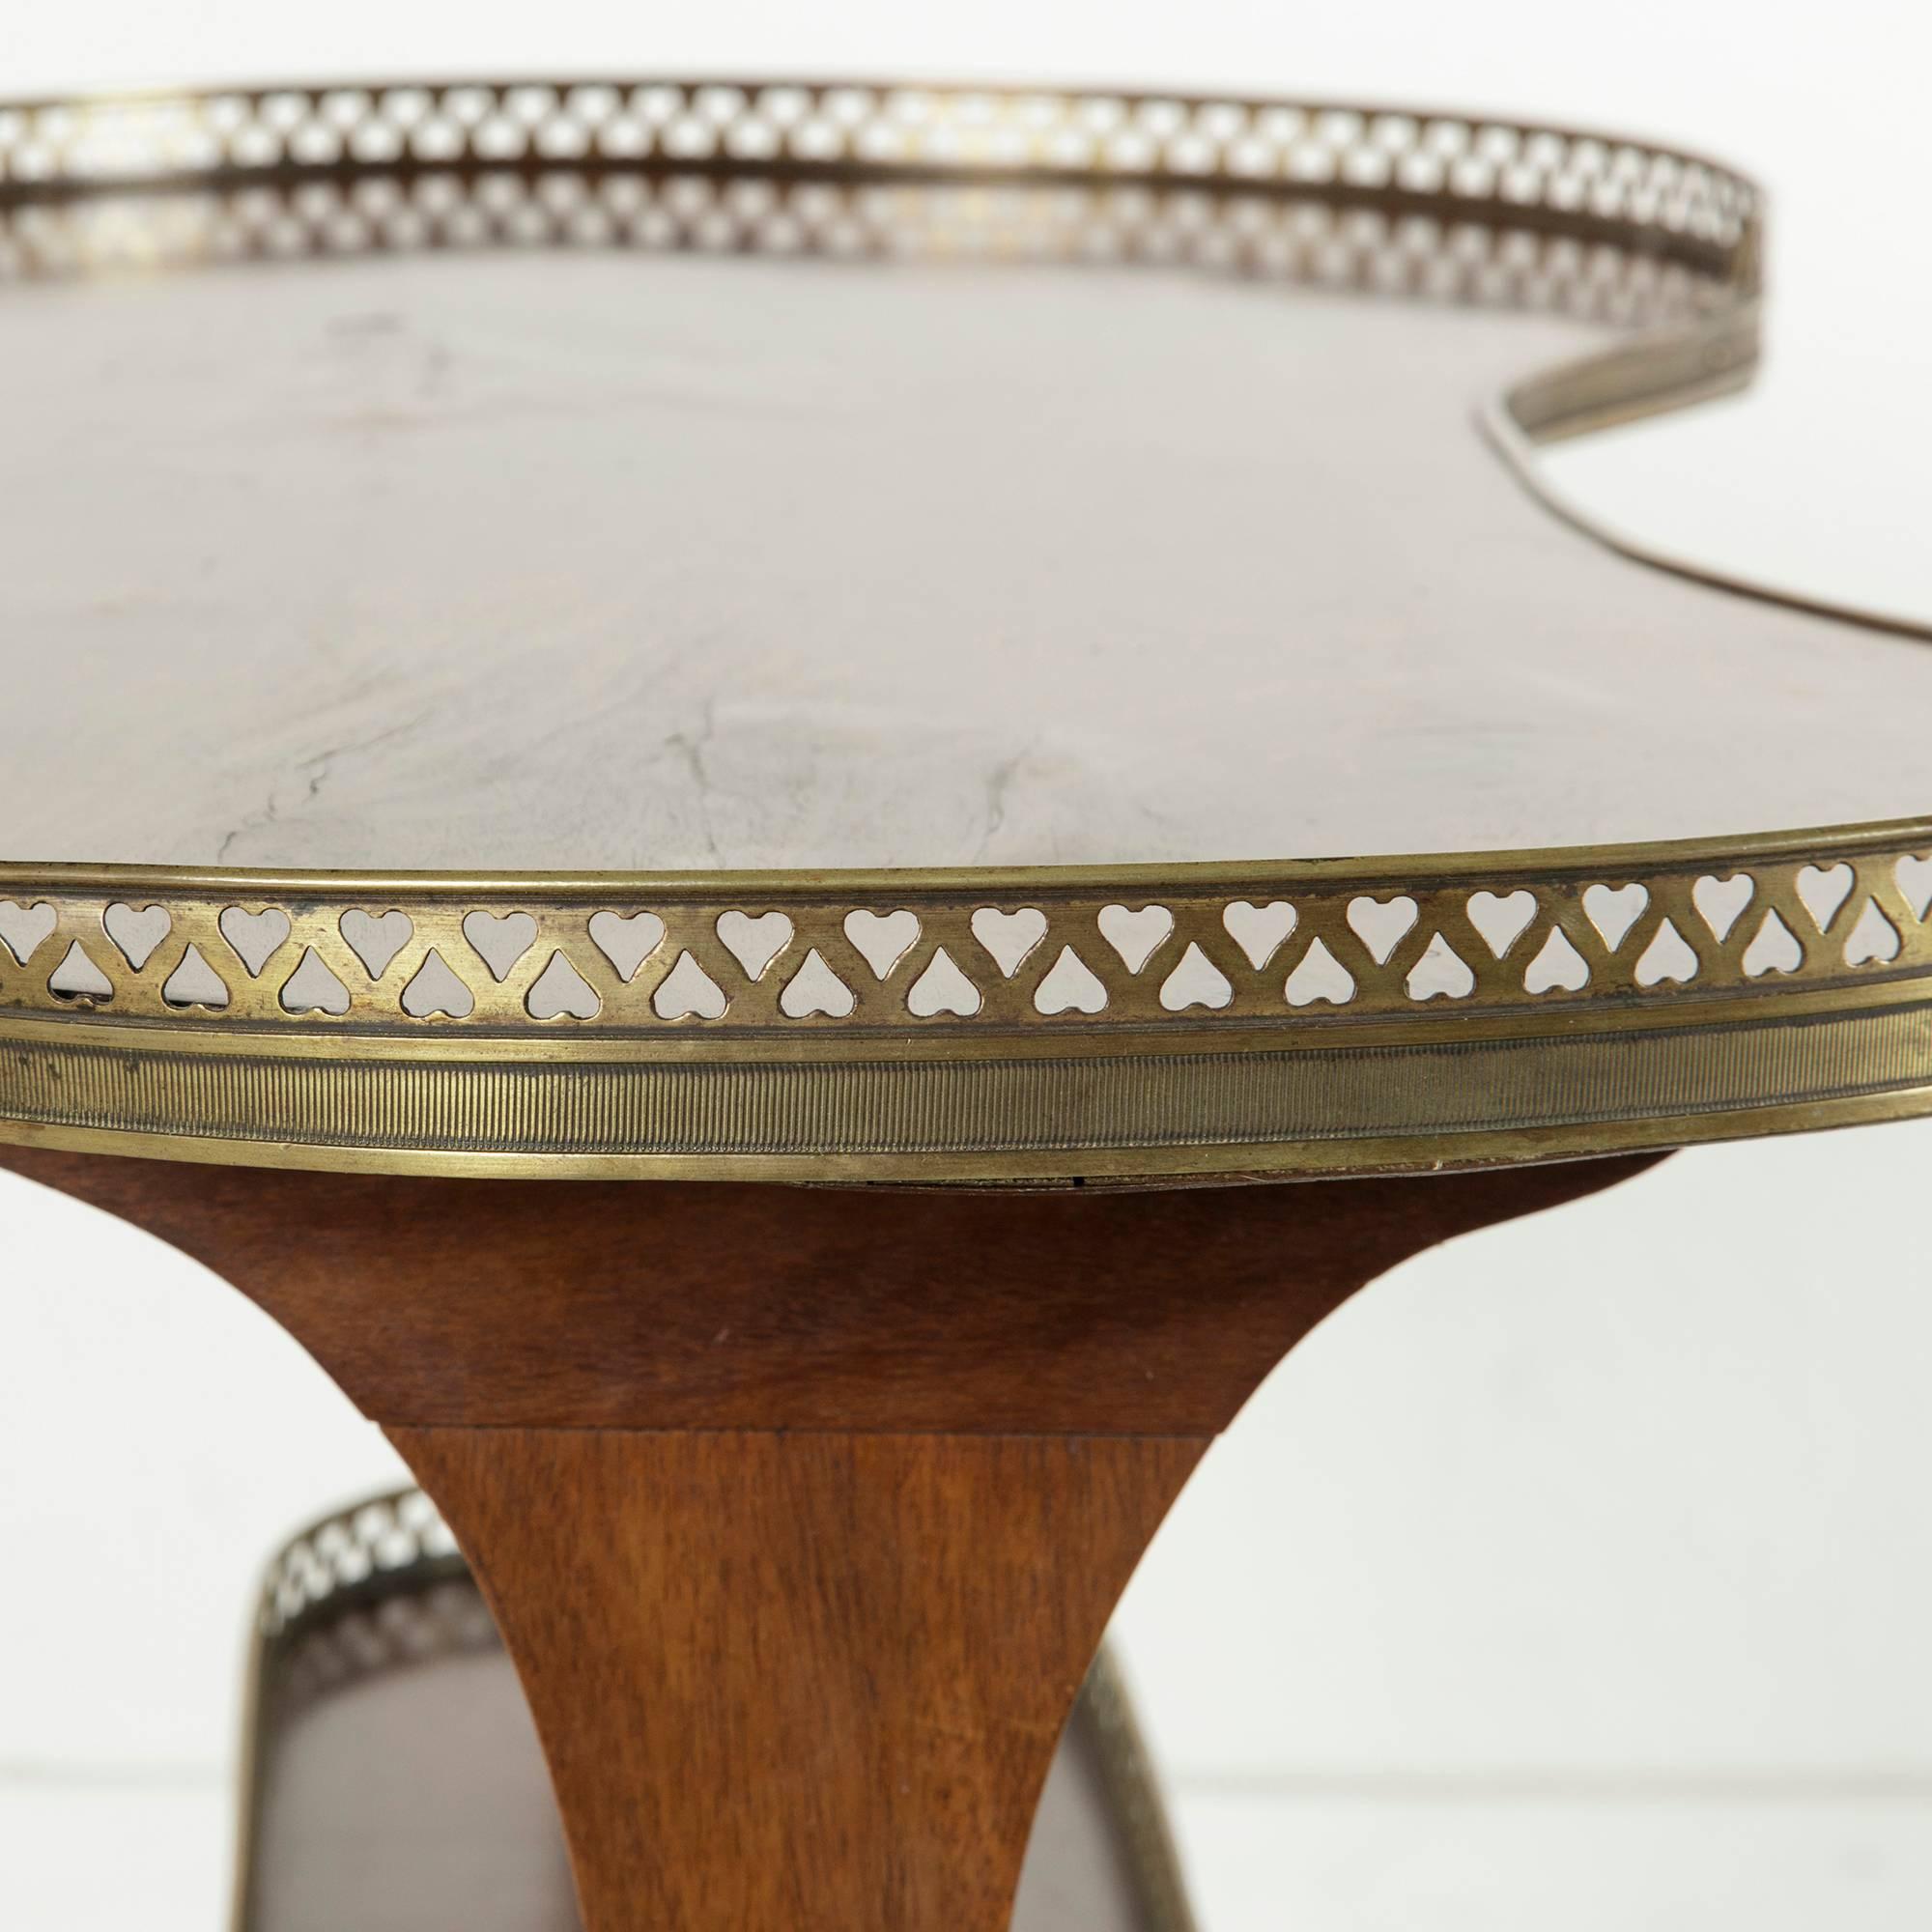 Restauration Period Rognon or Kidney Side Table in Mahogany with Bronze Gallery 4